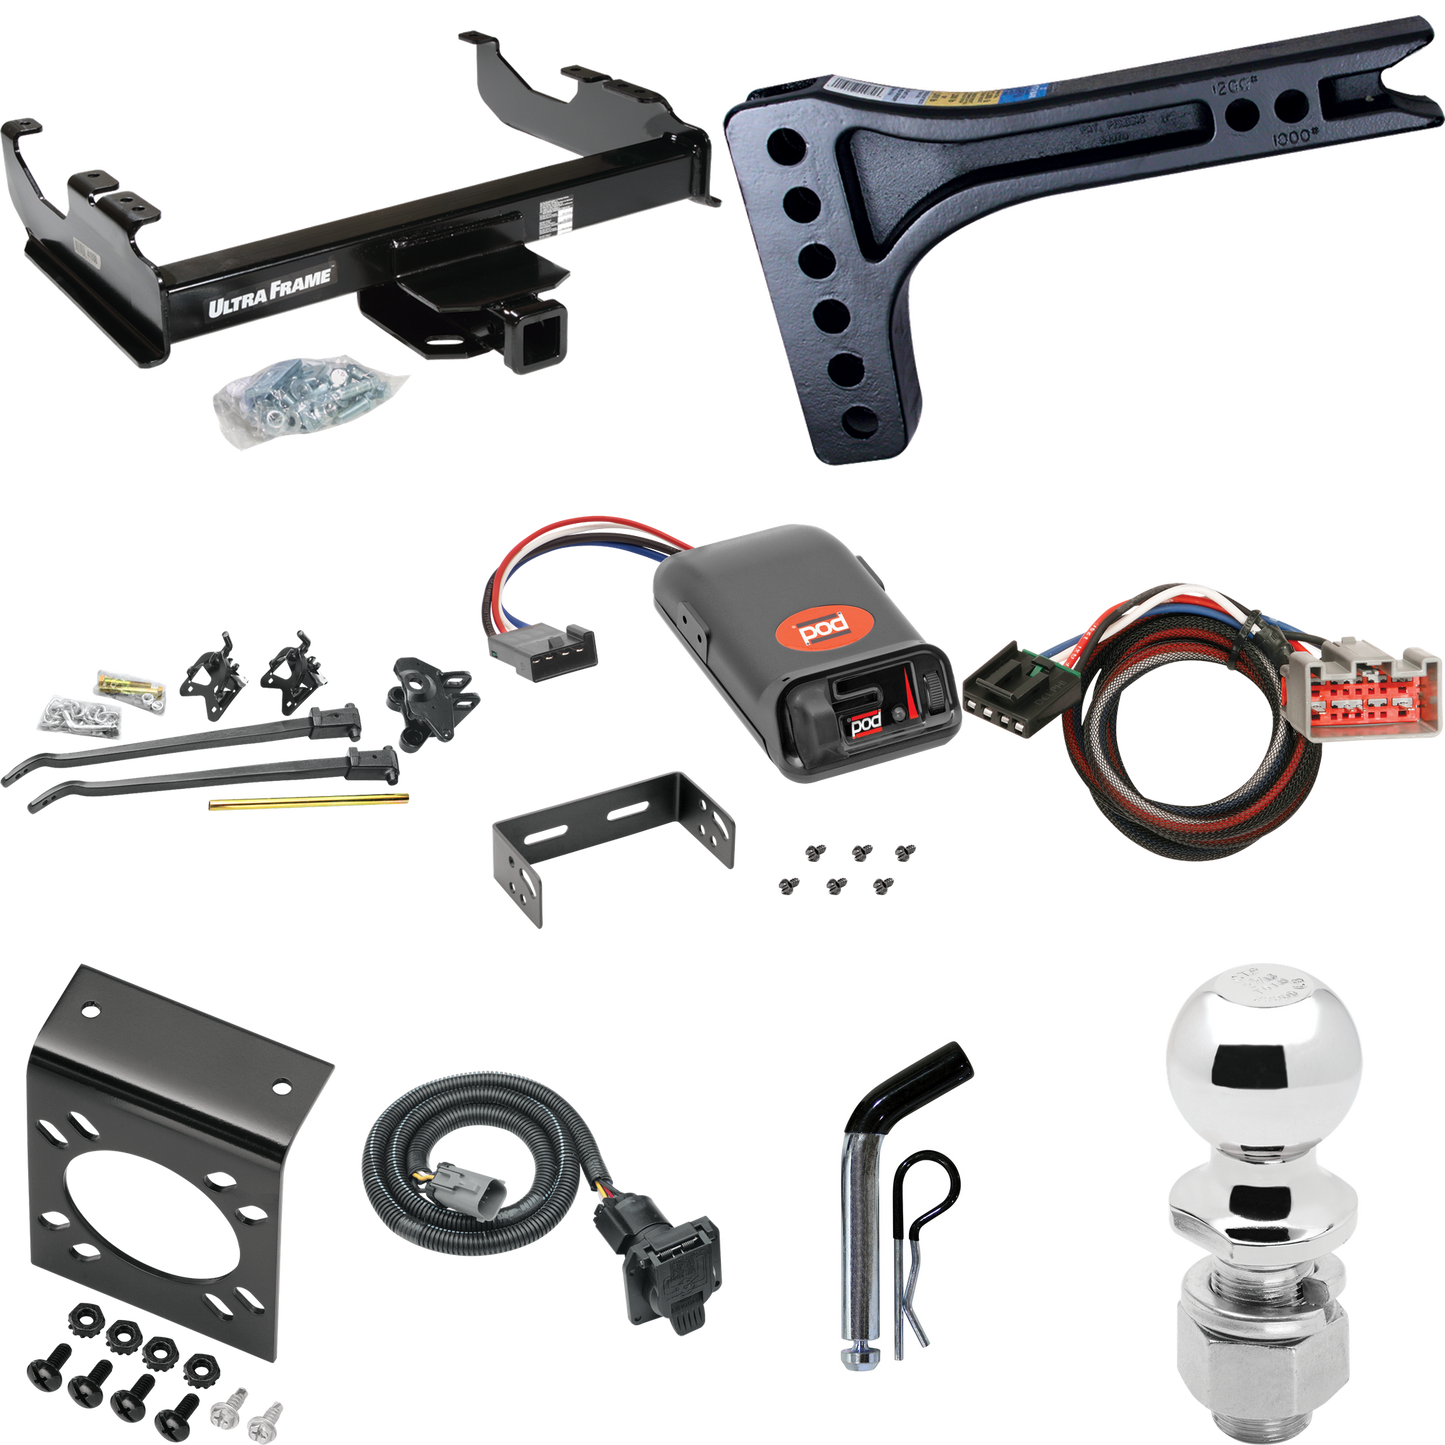 Fits 1999-2000 Ford F-350 Super Duty Trailer Hitch Tow PKG w/ 15K Trunnion Bar Weight Distribution Hitch + Pin/Clip + 2-5/16" Ball + Pro Series POD Brake Control + Plug & Play BC Adapter + 7-Way RV Wiring (For Cab & Chassis, w/34" Wide Frames Models)